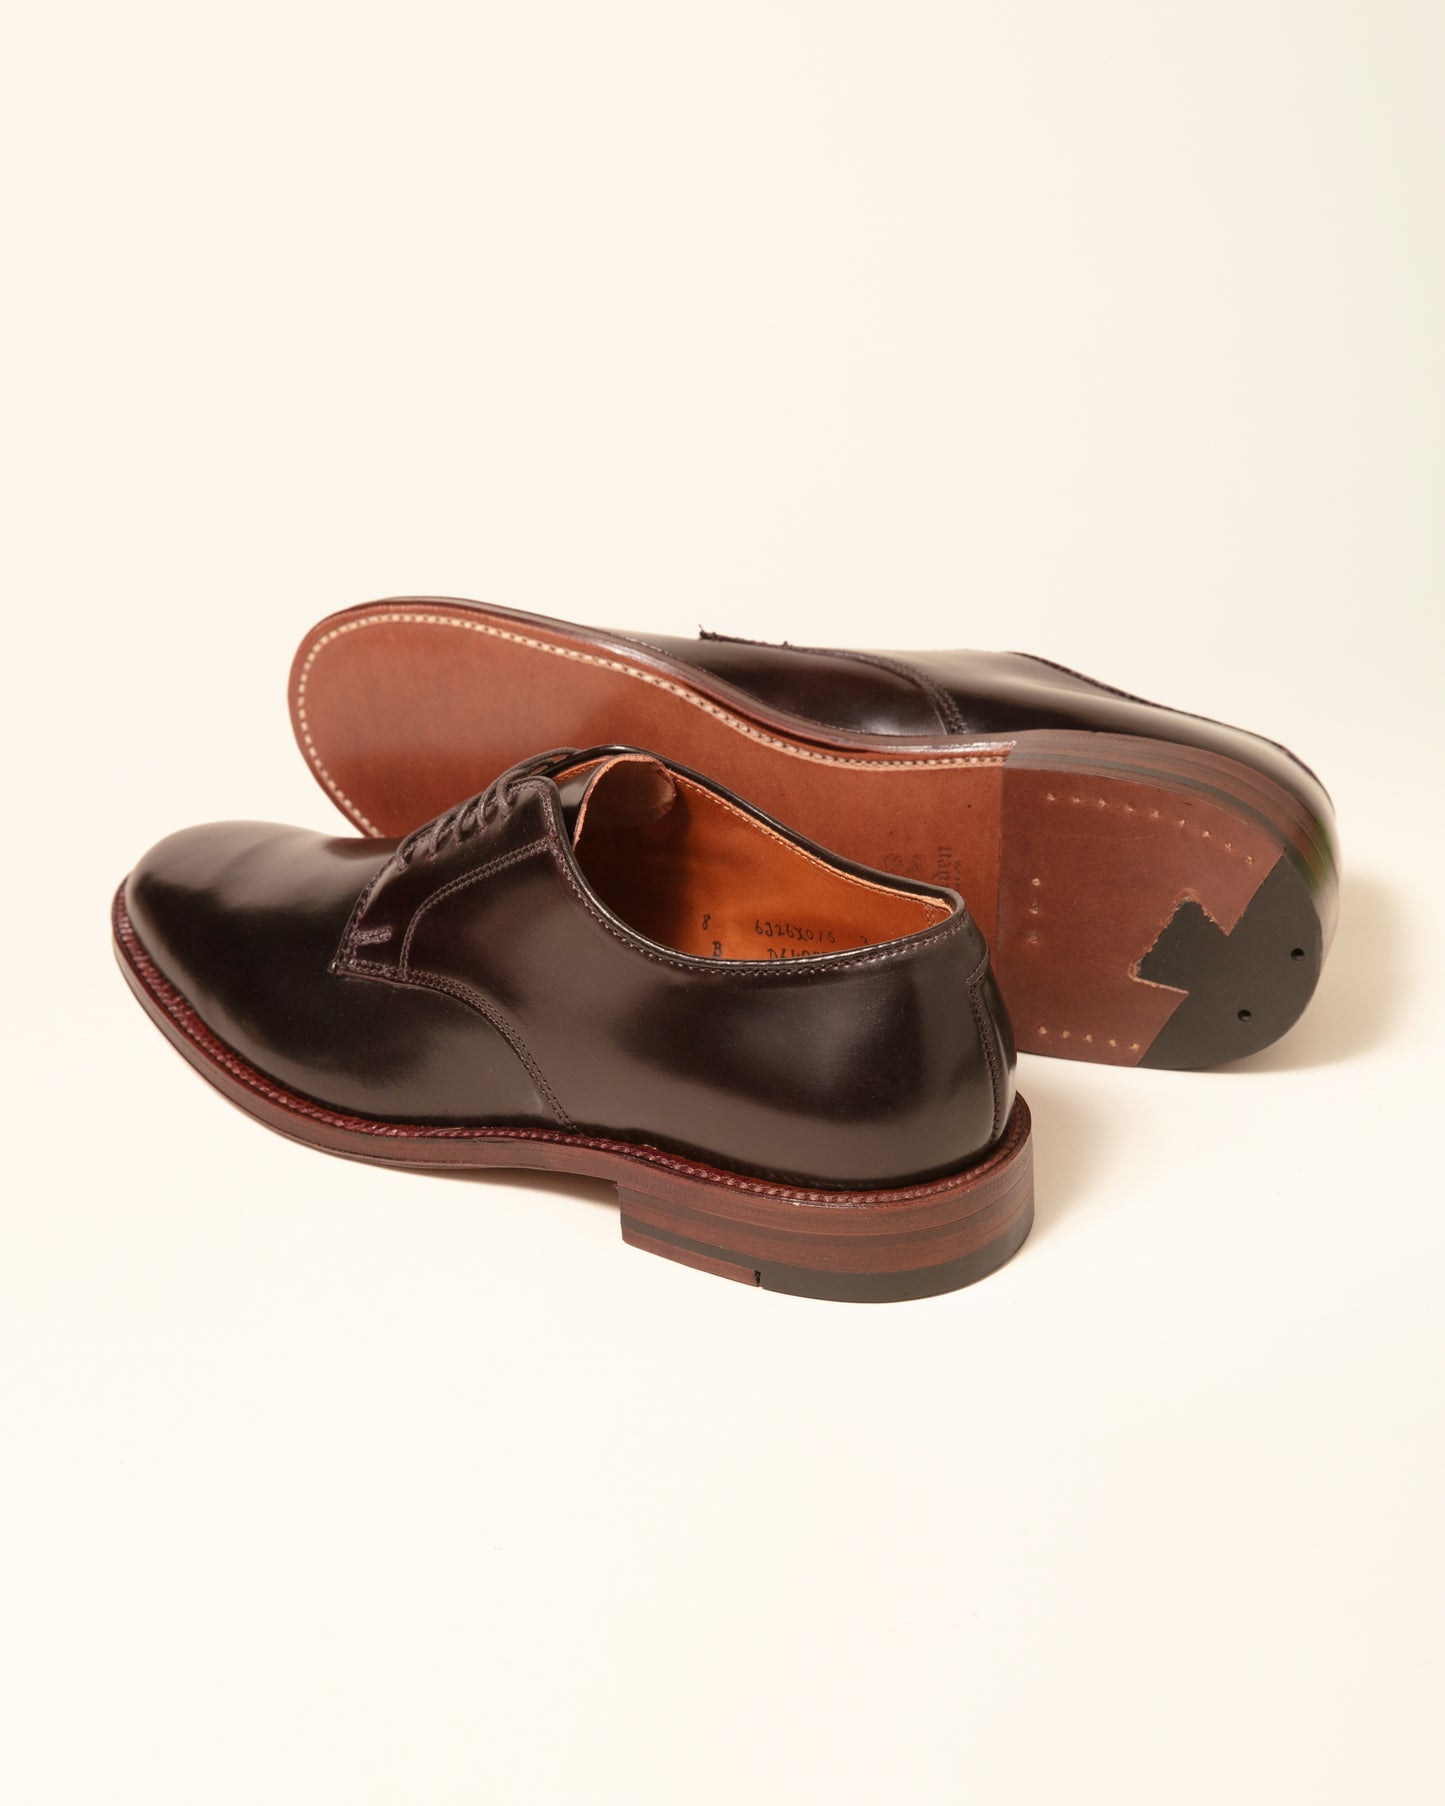 "Victory Heights" Unlined Plain Toe Dover in Color 8 Shell Cordovan, Barrie Last